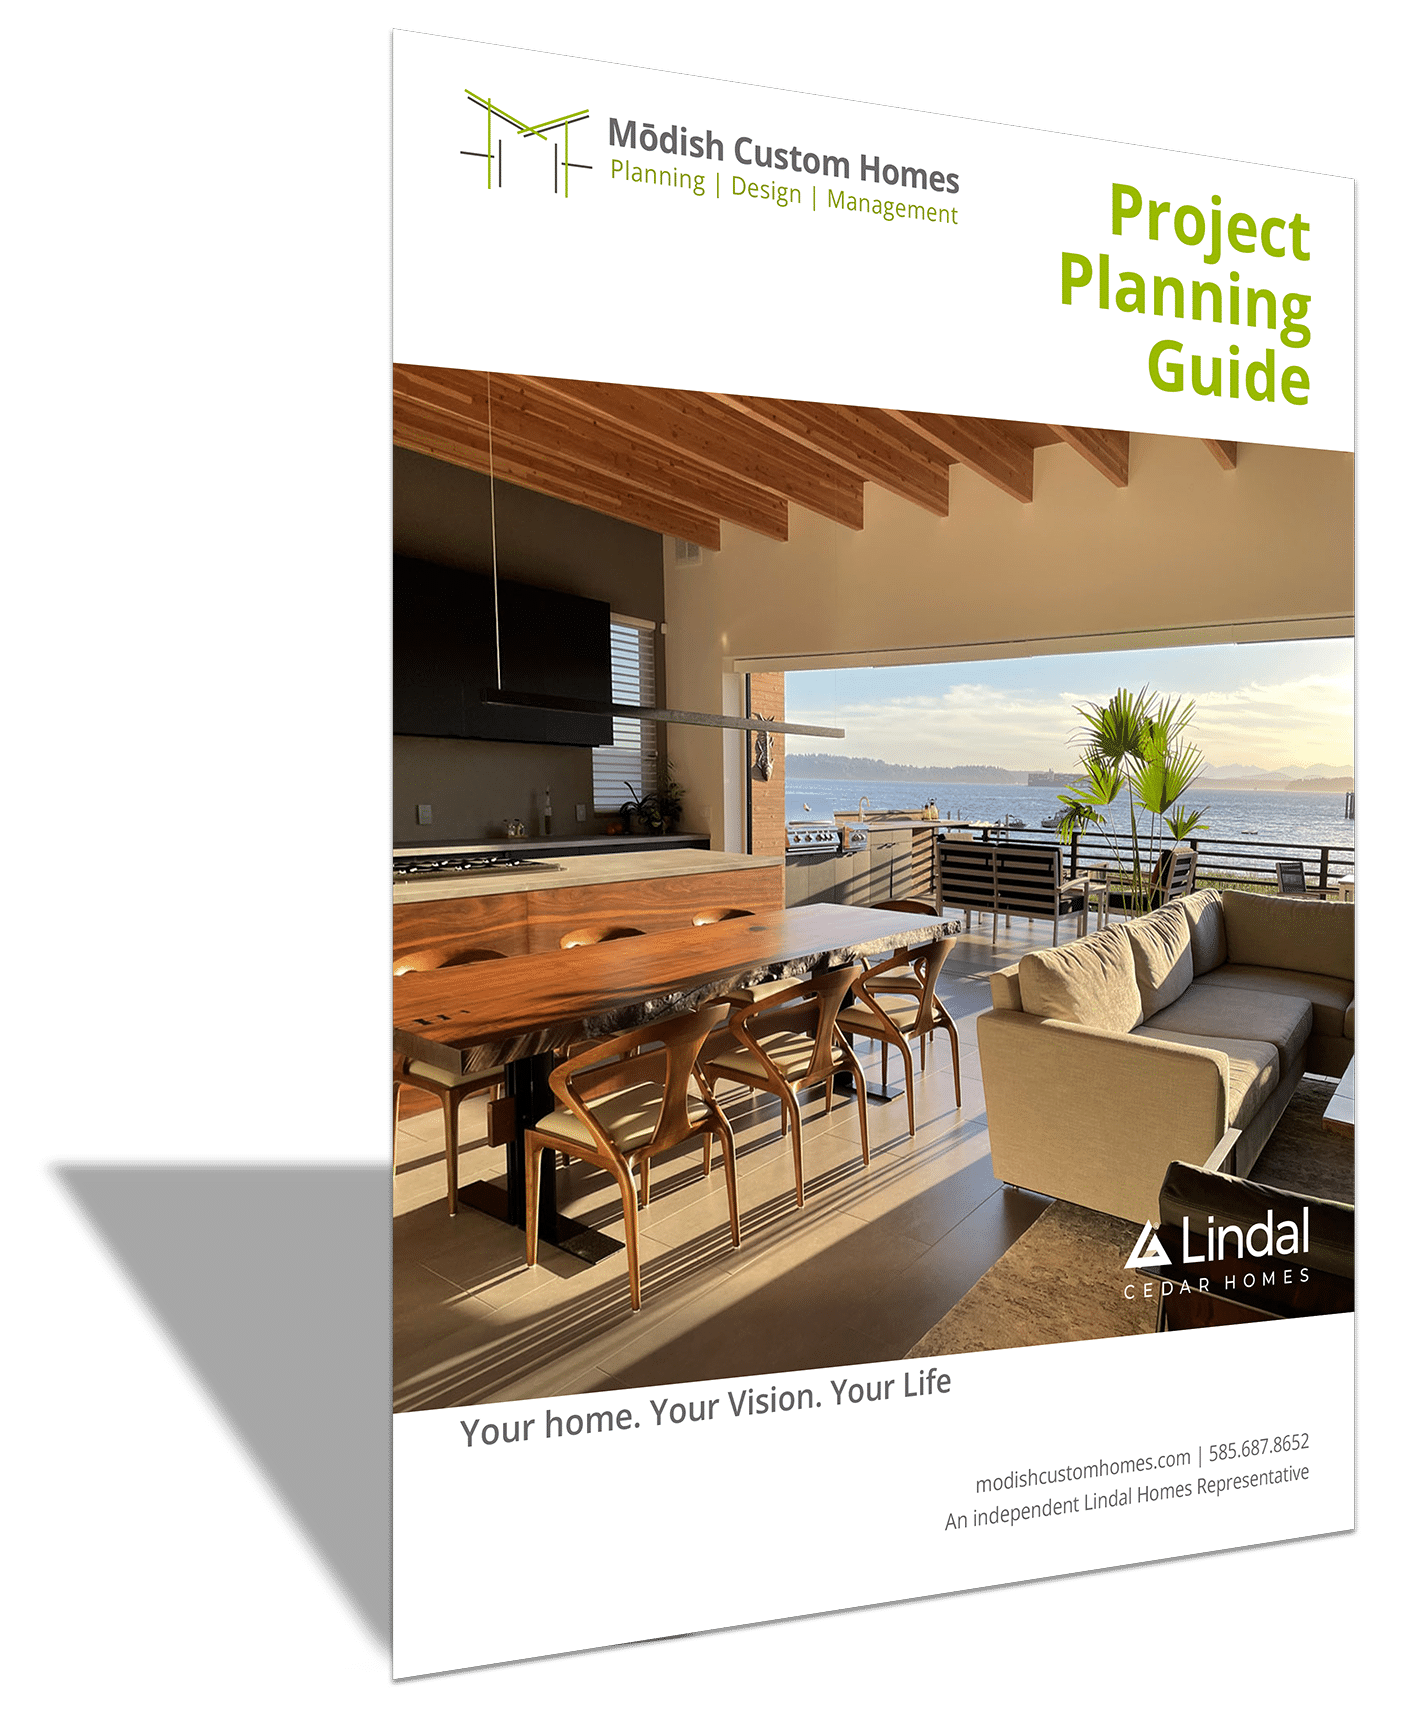 Project Planning Guide - Mōdish Custom Homes